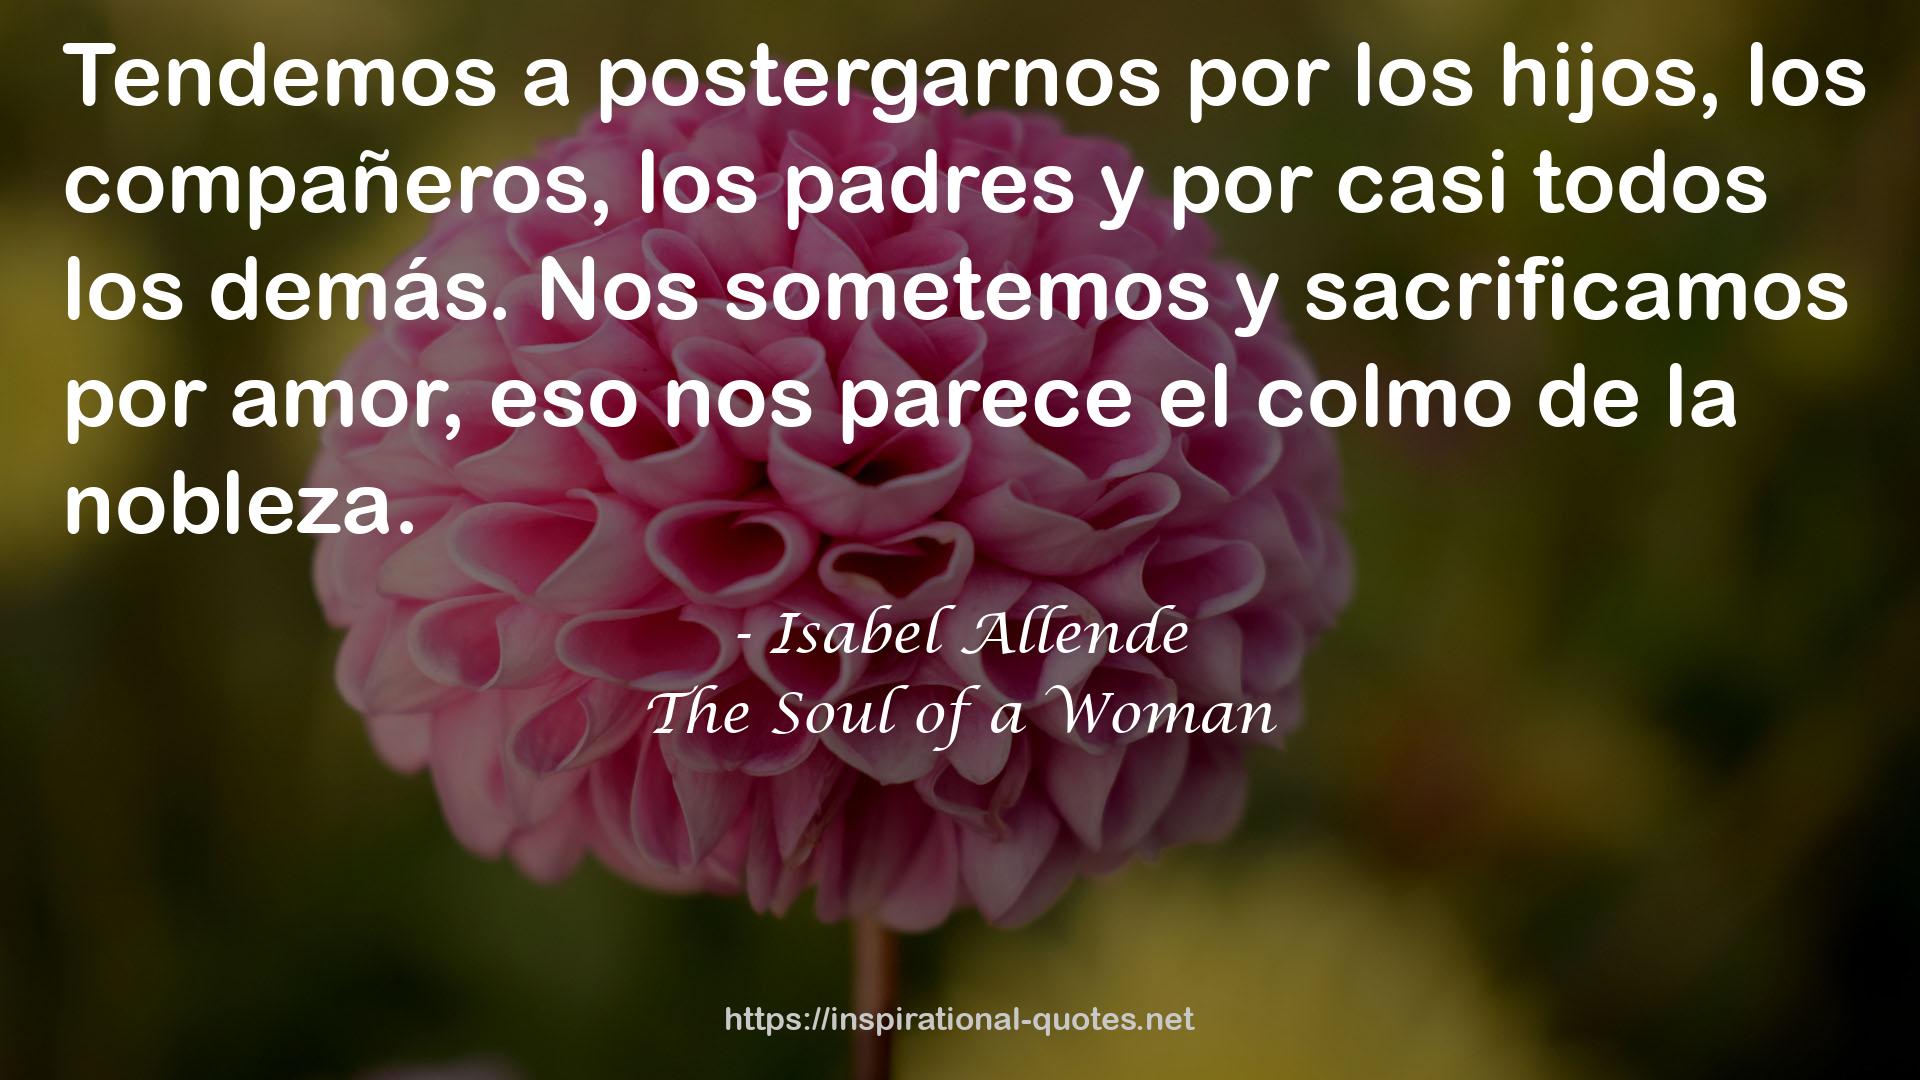 The Soul of a Woman QUOTES